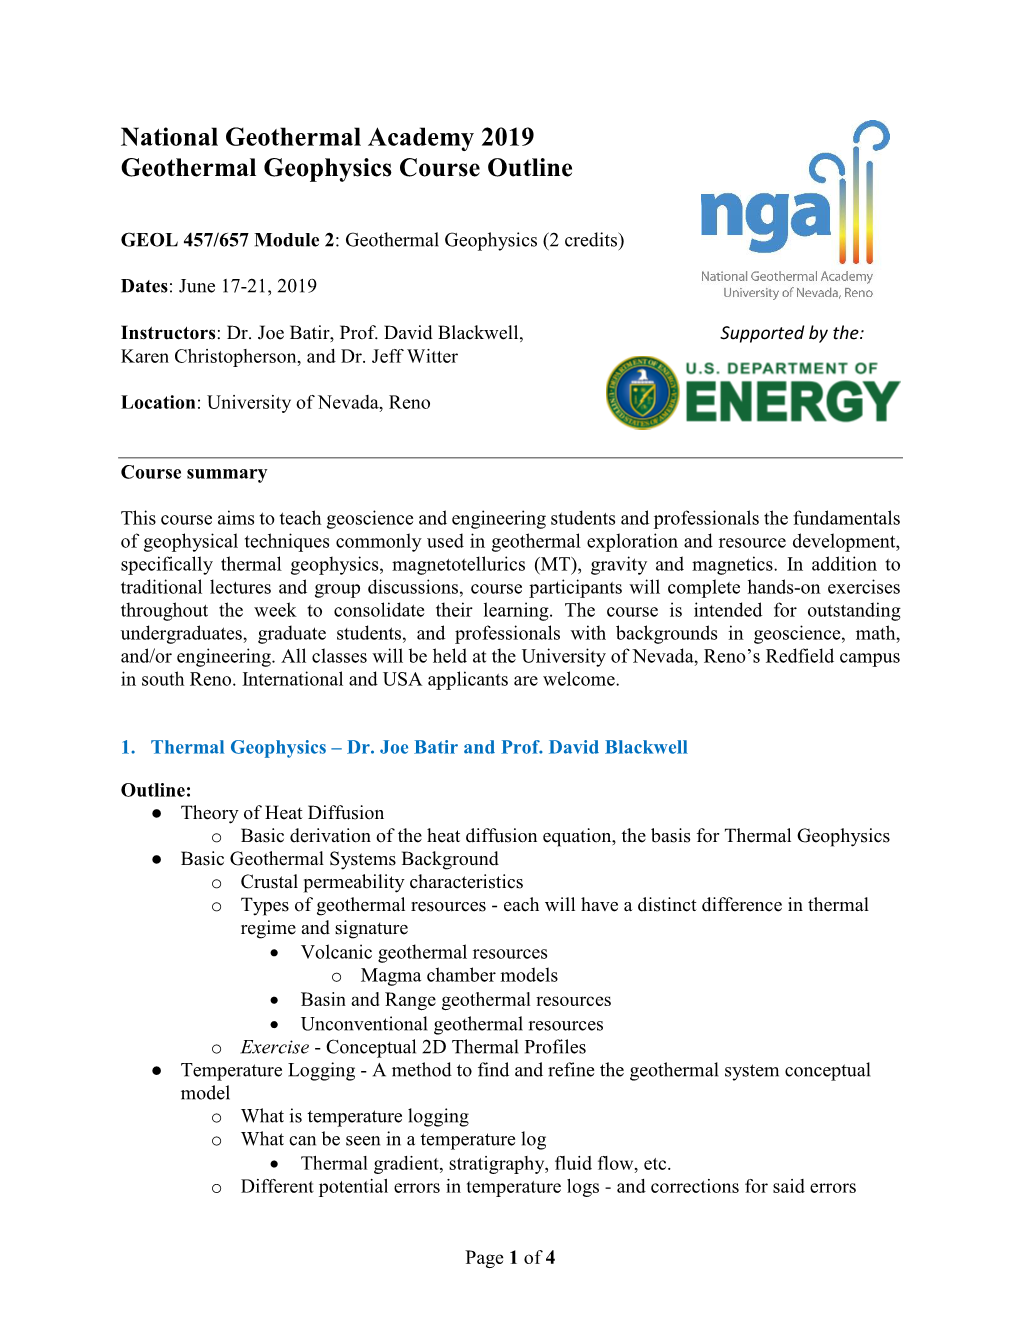 NGA Geothermal Geophysics Course Outline June2019